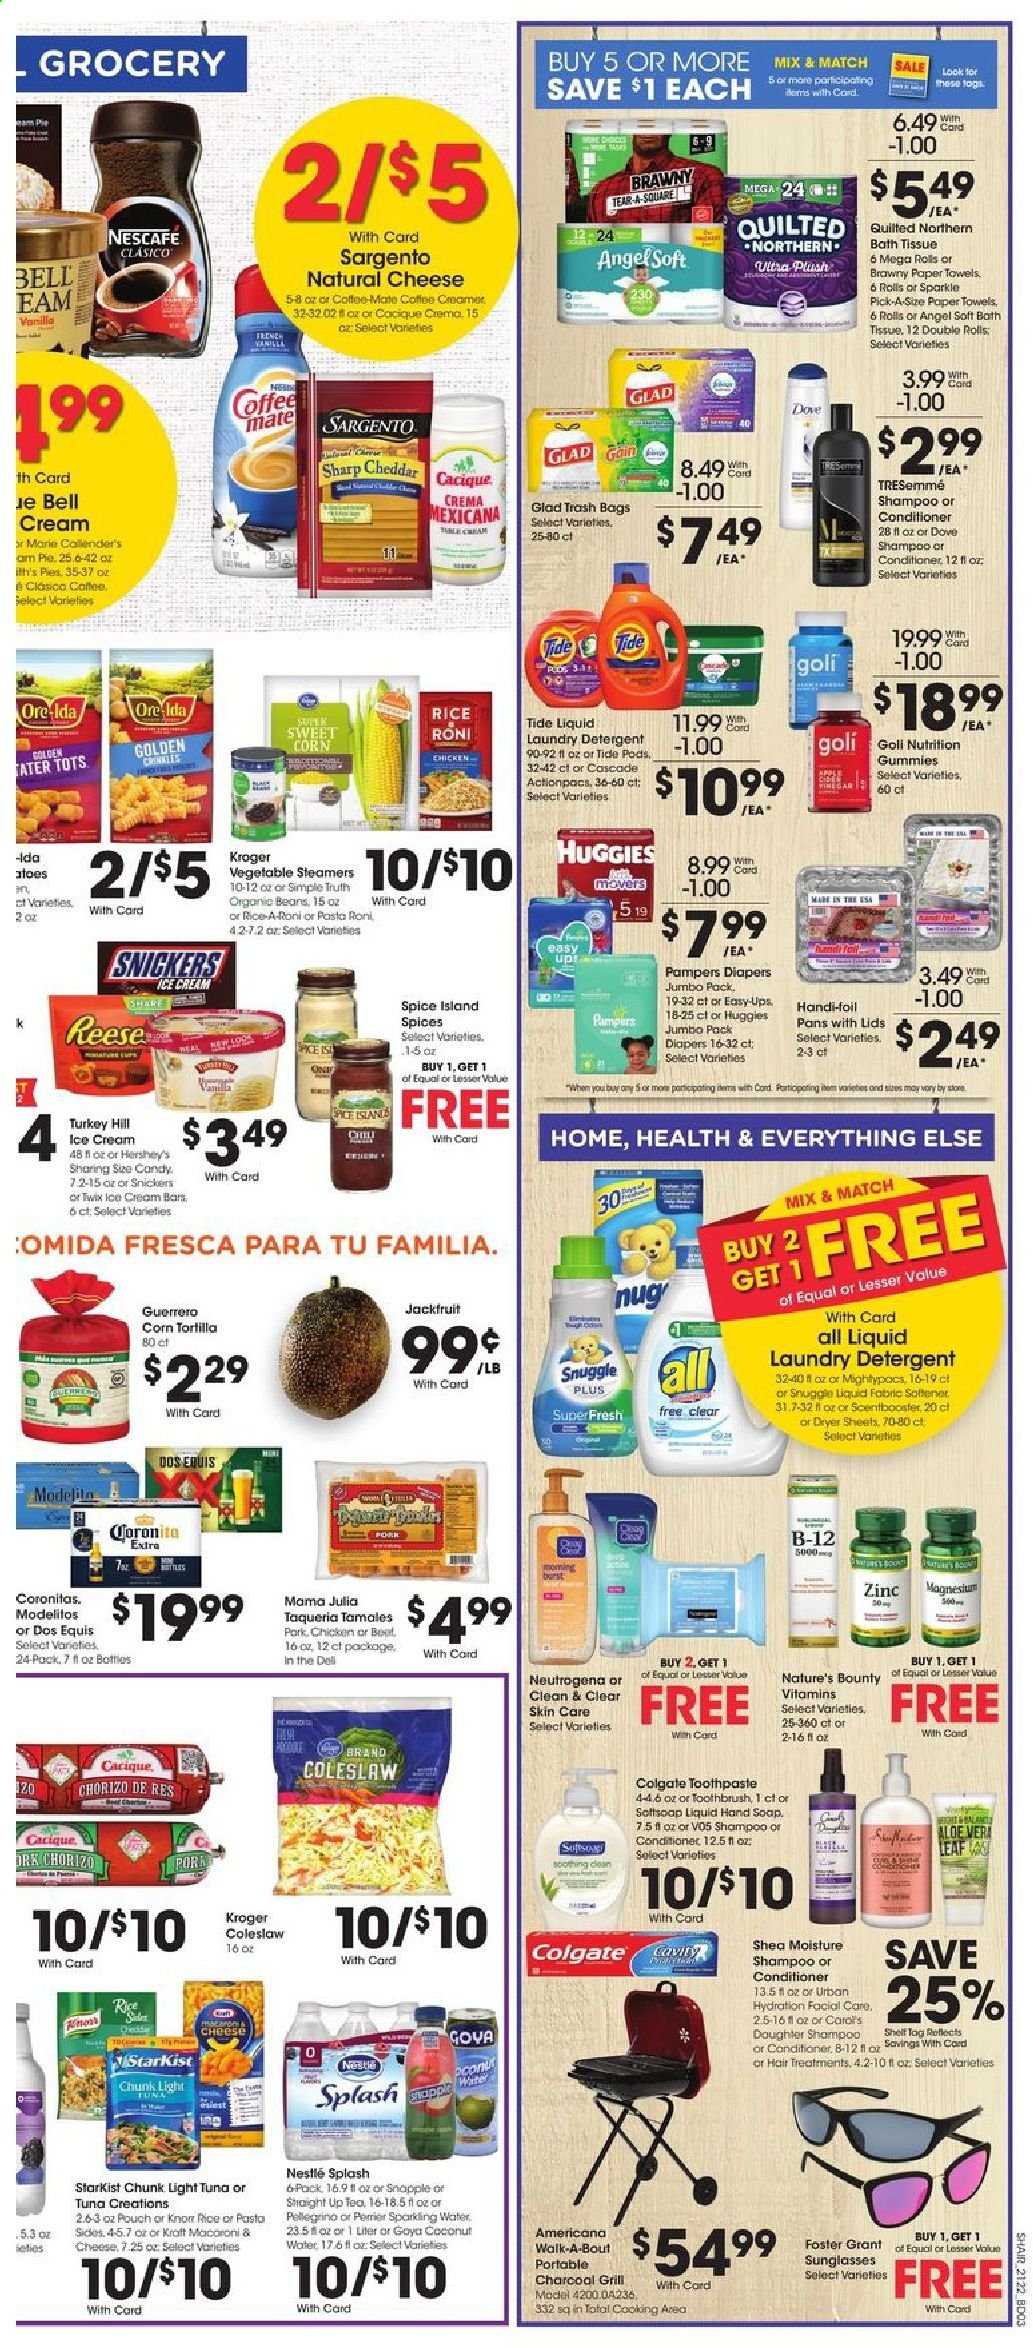 thumbnail - Kroger Flyer - 06/30/2021 - 07/06/2021 - Sales products - tortillas, pie, sweet corn, tuna, StarKist, coleslaw, Kraft®, chorizo, cheddar, cheese, Sargento, Coffee-Mate, ice cream, Hershey's, Ore-Ida, Nestlé, Snickers, Twix, light tuna, Goya, spice, Snapple, Perrier, sparkling water, San Pellegrino, tea, Nescafé, beer, Dos Equis, Huggies, Pampers, nappies, Dove, bath tissue, Quilted Northern, kitchen towels, paper towels, detergent, Gain, Cascade, Snuggle, Tide, fabric softener, laundry detergent, dryer sheets, shampoo, Softsoap, hand soap, soap, Colgate, toothbrush, toothpaste, Neutrogena, Clean & Clear, conditioner, TRESemmé, VO5, trash bags, bag, sunglasses, magnesium, Nature's Bounty, zinc. Page 6.